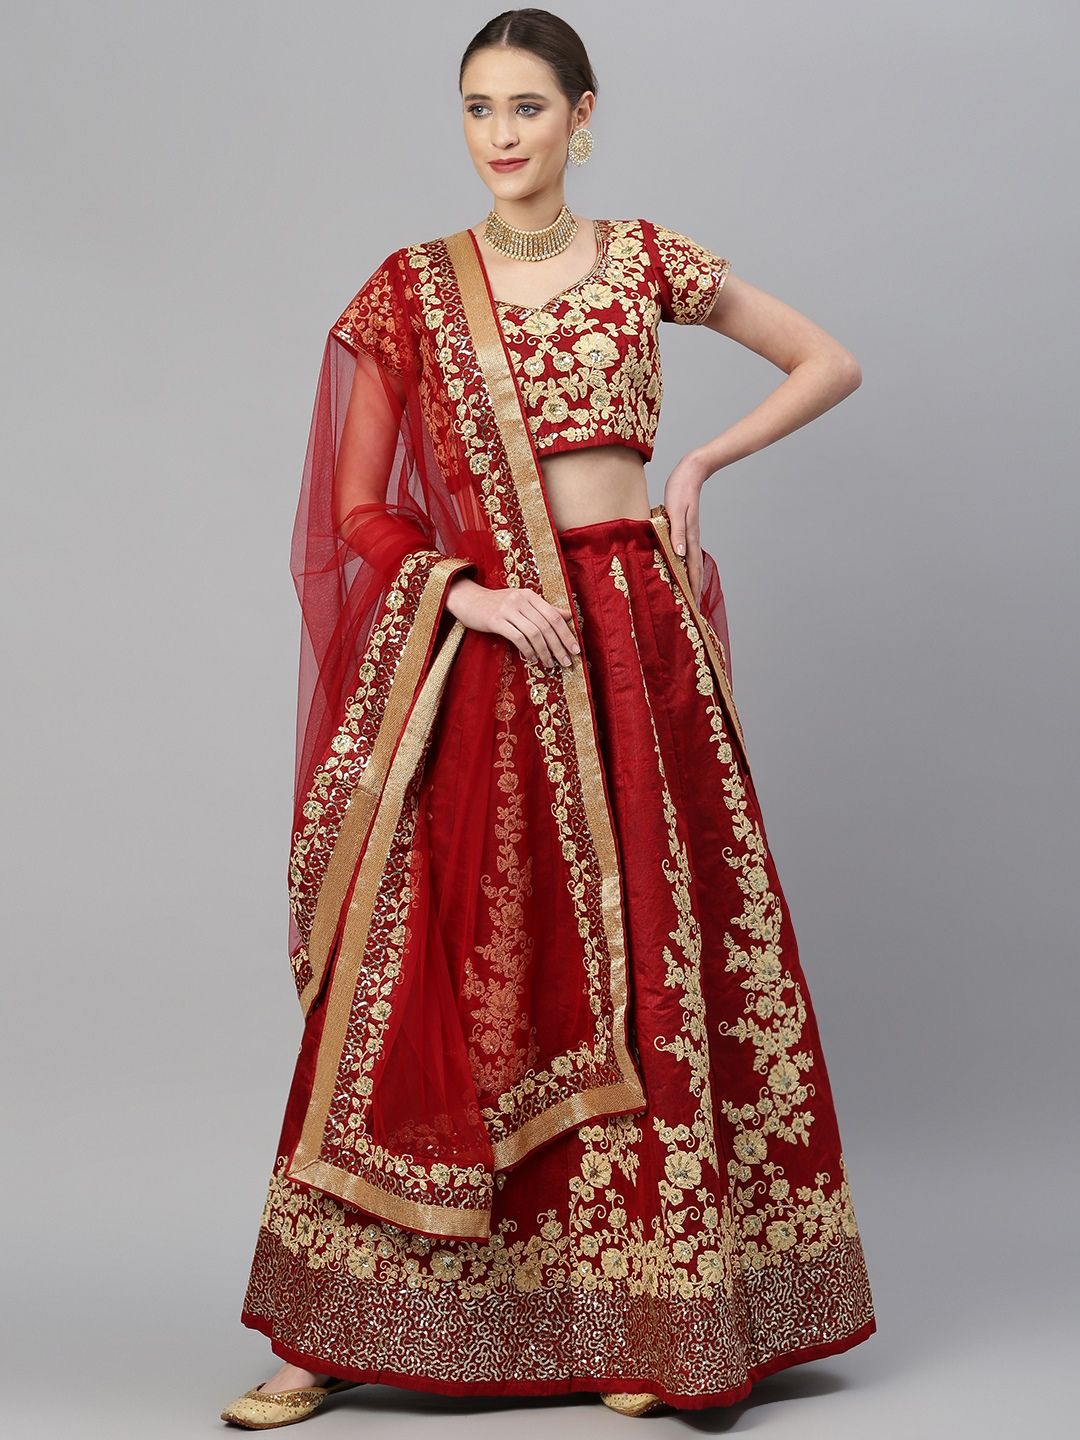 Readiprint Fashions Maroon & Gold Embroidered Semi-Stitched Lehenga & Unstitched Blouse Price in India